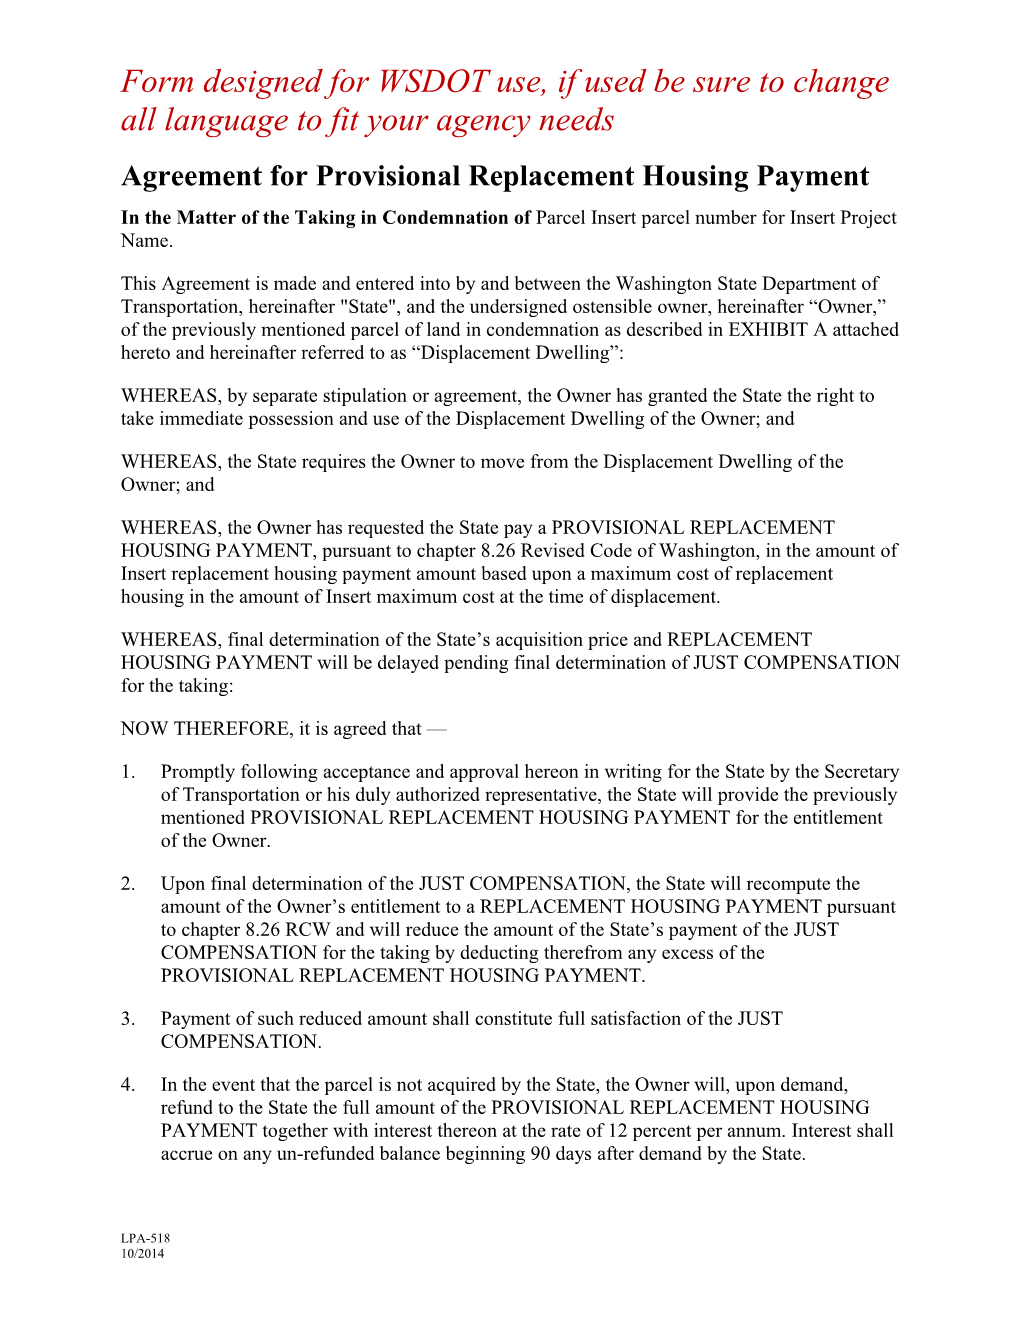 RES 518 Provisional Replacement Agreement